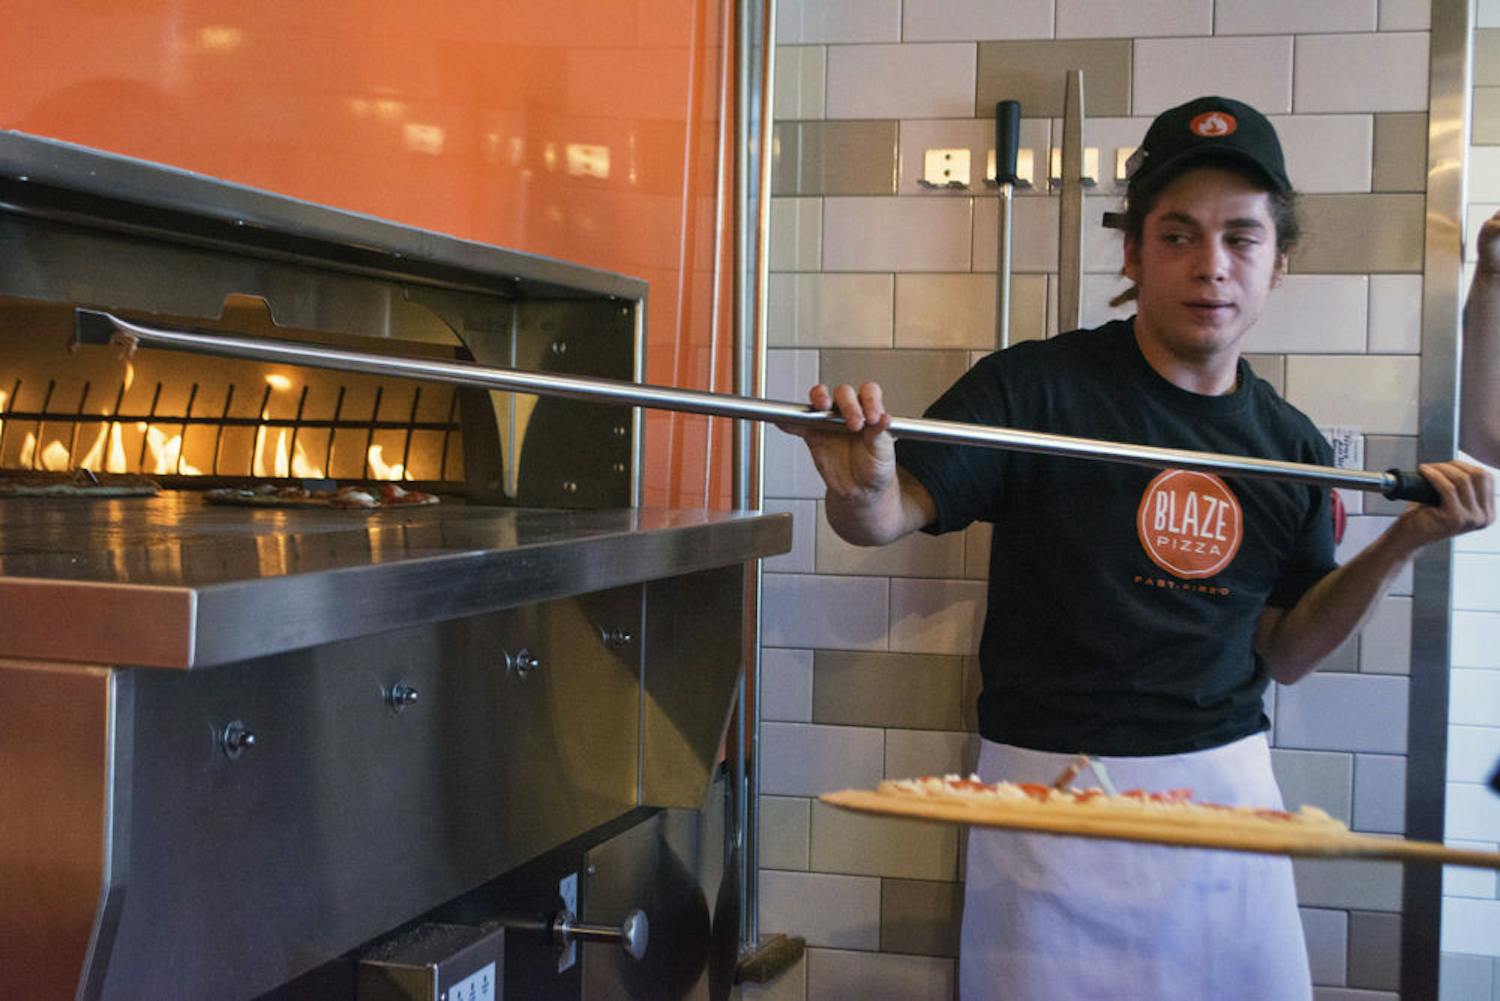 Blaze Fast-Fire’d Pizza employee Dallas Witters, 23, turns pizza in an oven using a long paddle at the joint’s meet-and-greet event Wednesday.